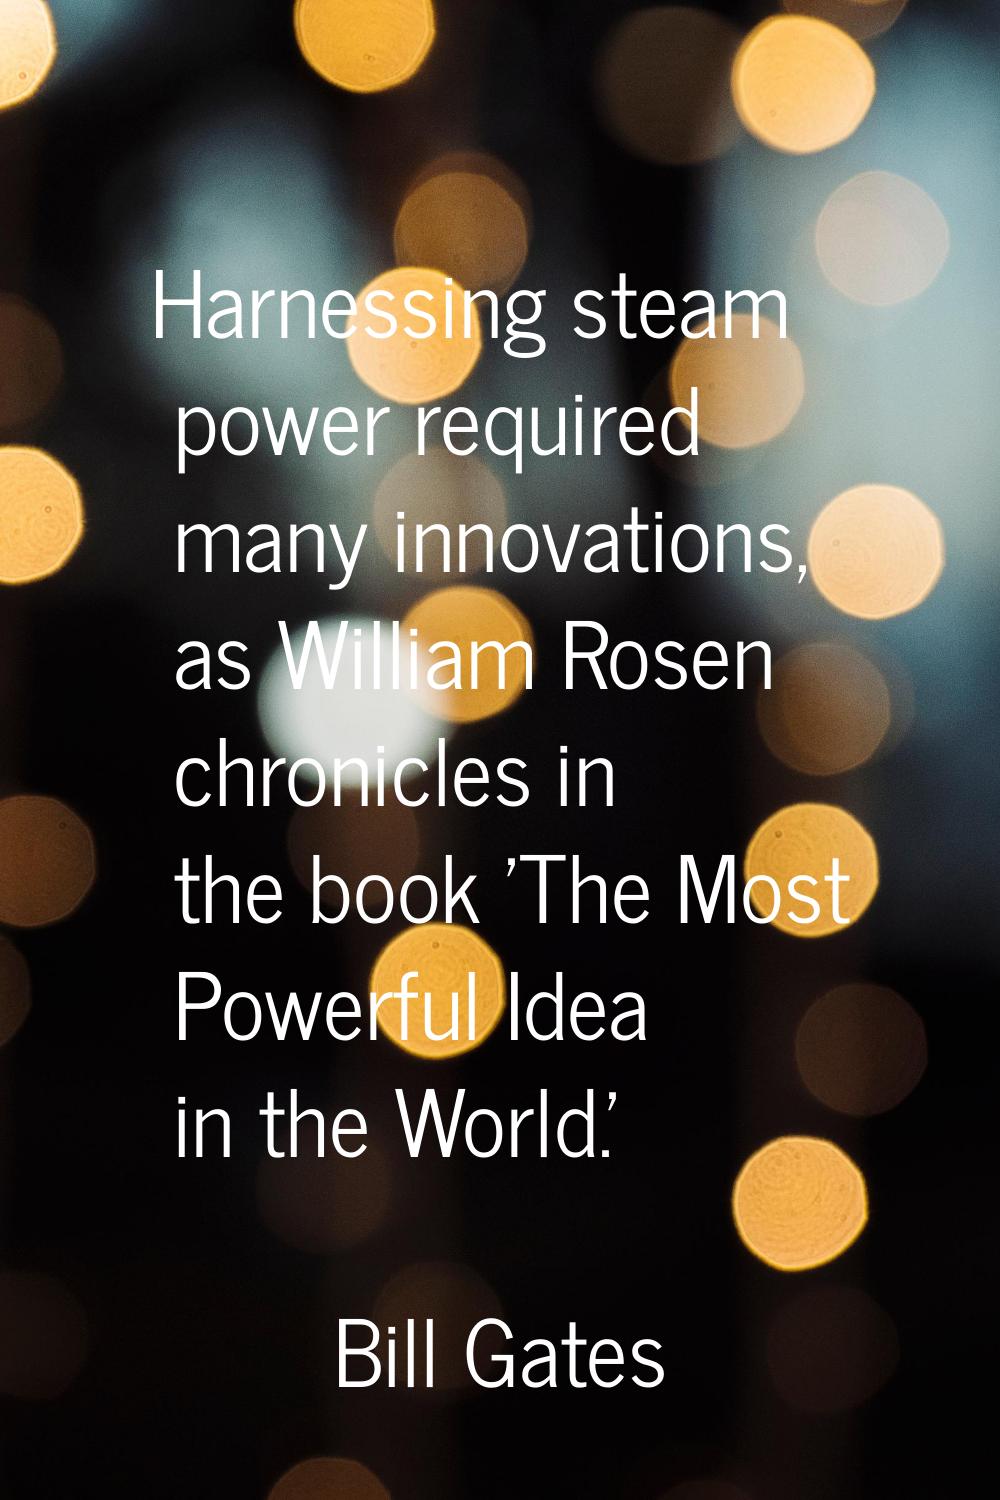 Harnessing steam power required many innovations, as William Rosen chronicles in the book 'The Most